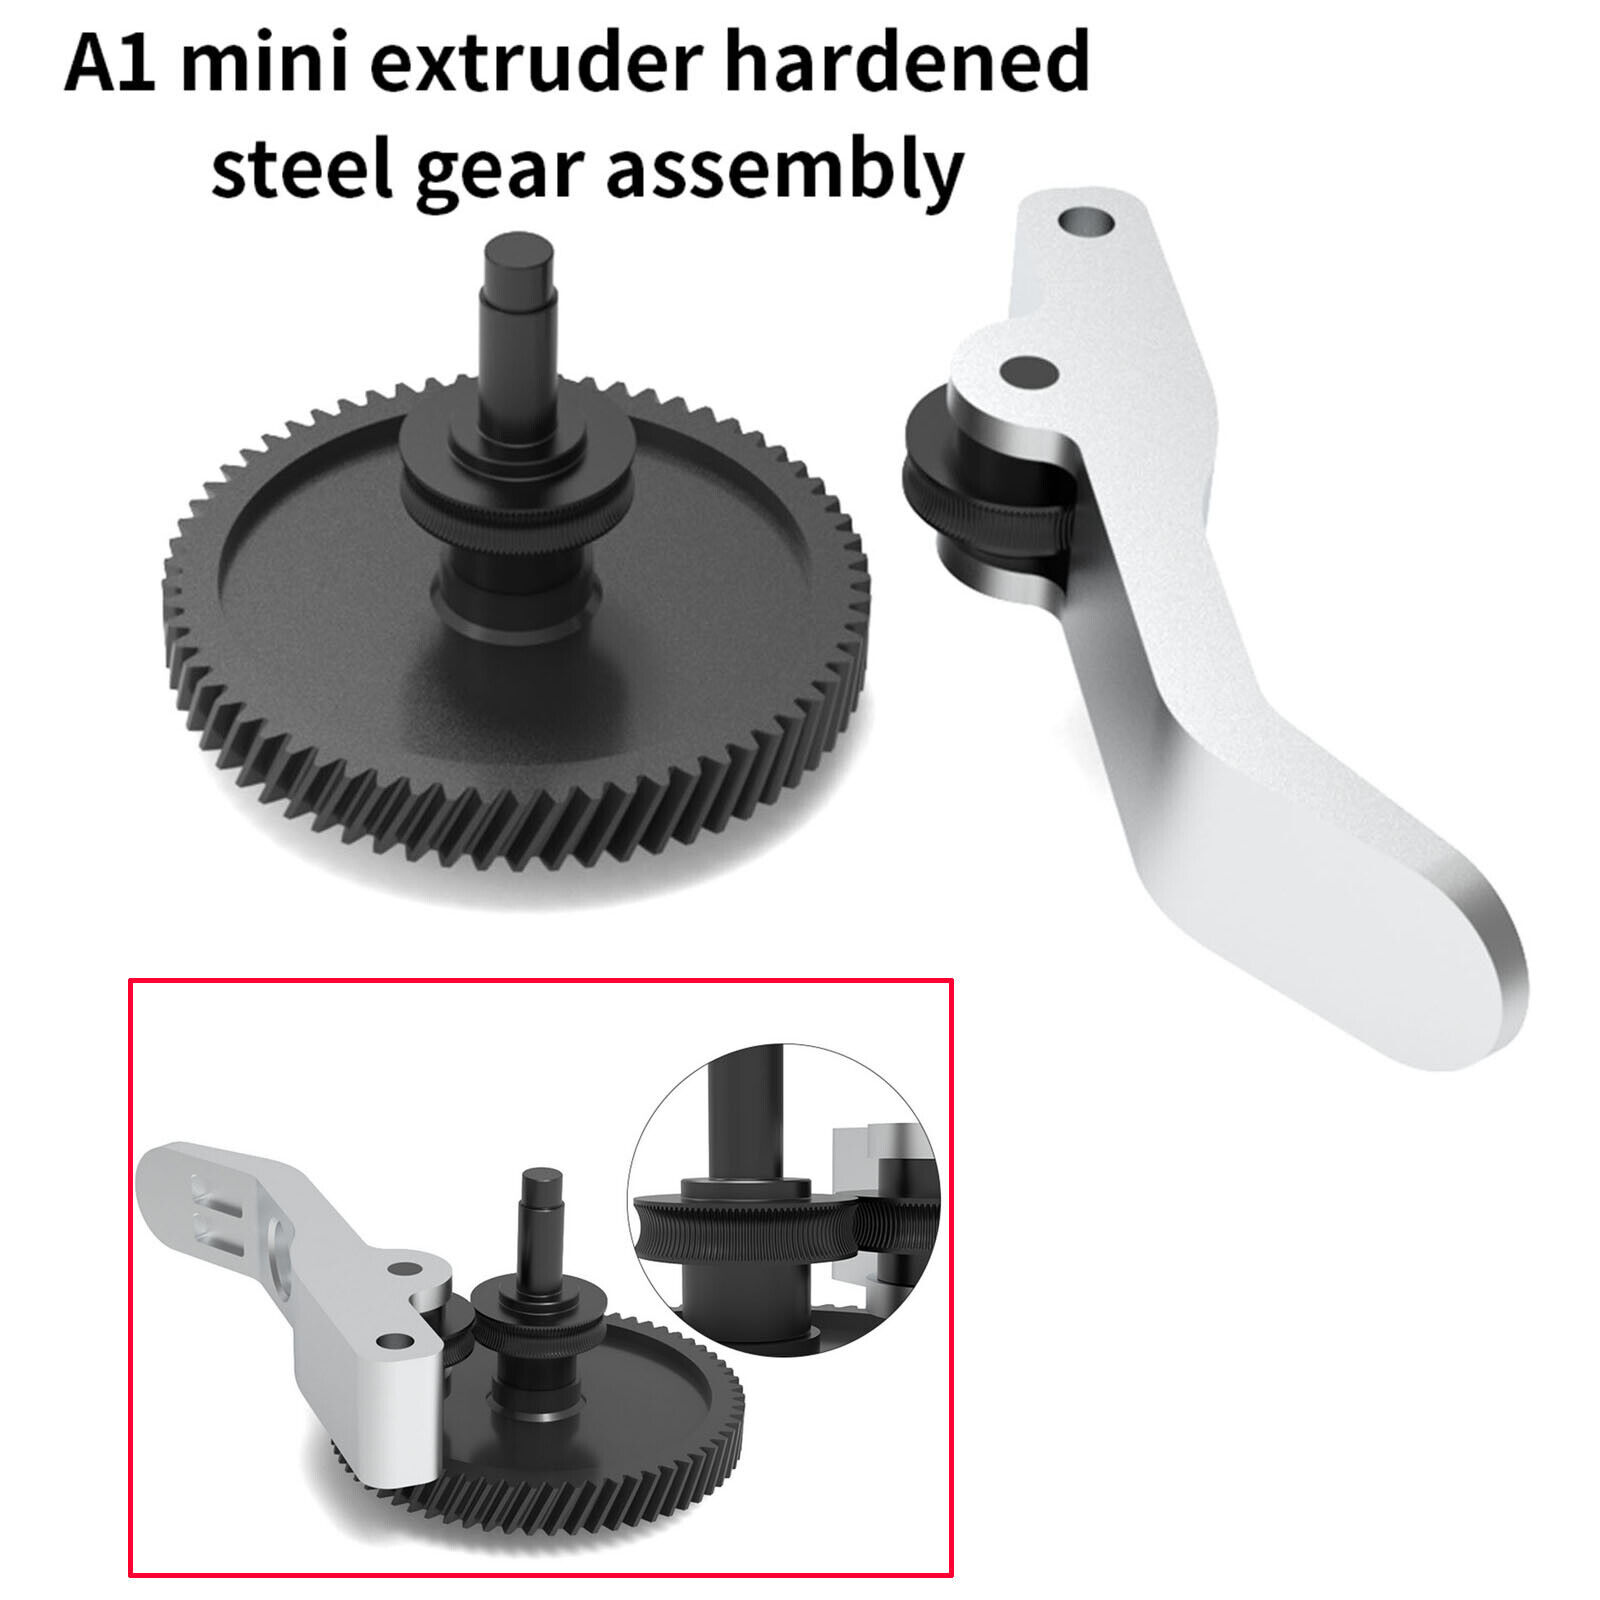 3D Printer Nano-coated Harden Steel Extruder Gear Assembly For Bambu Lab A1 Mini